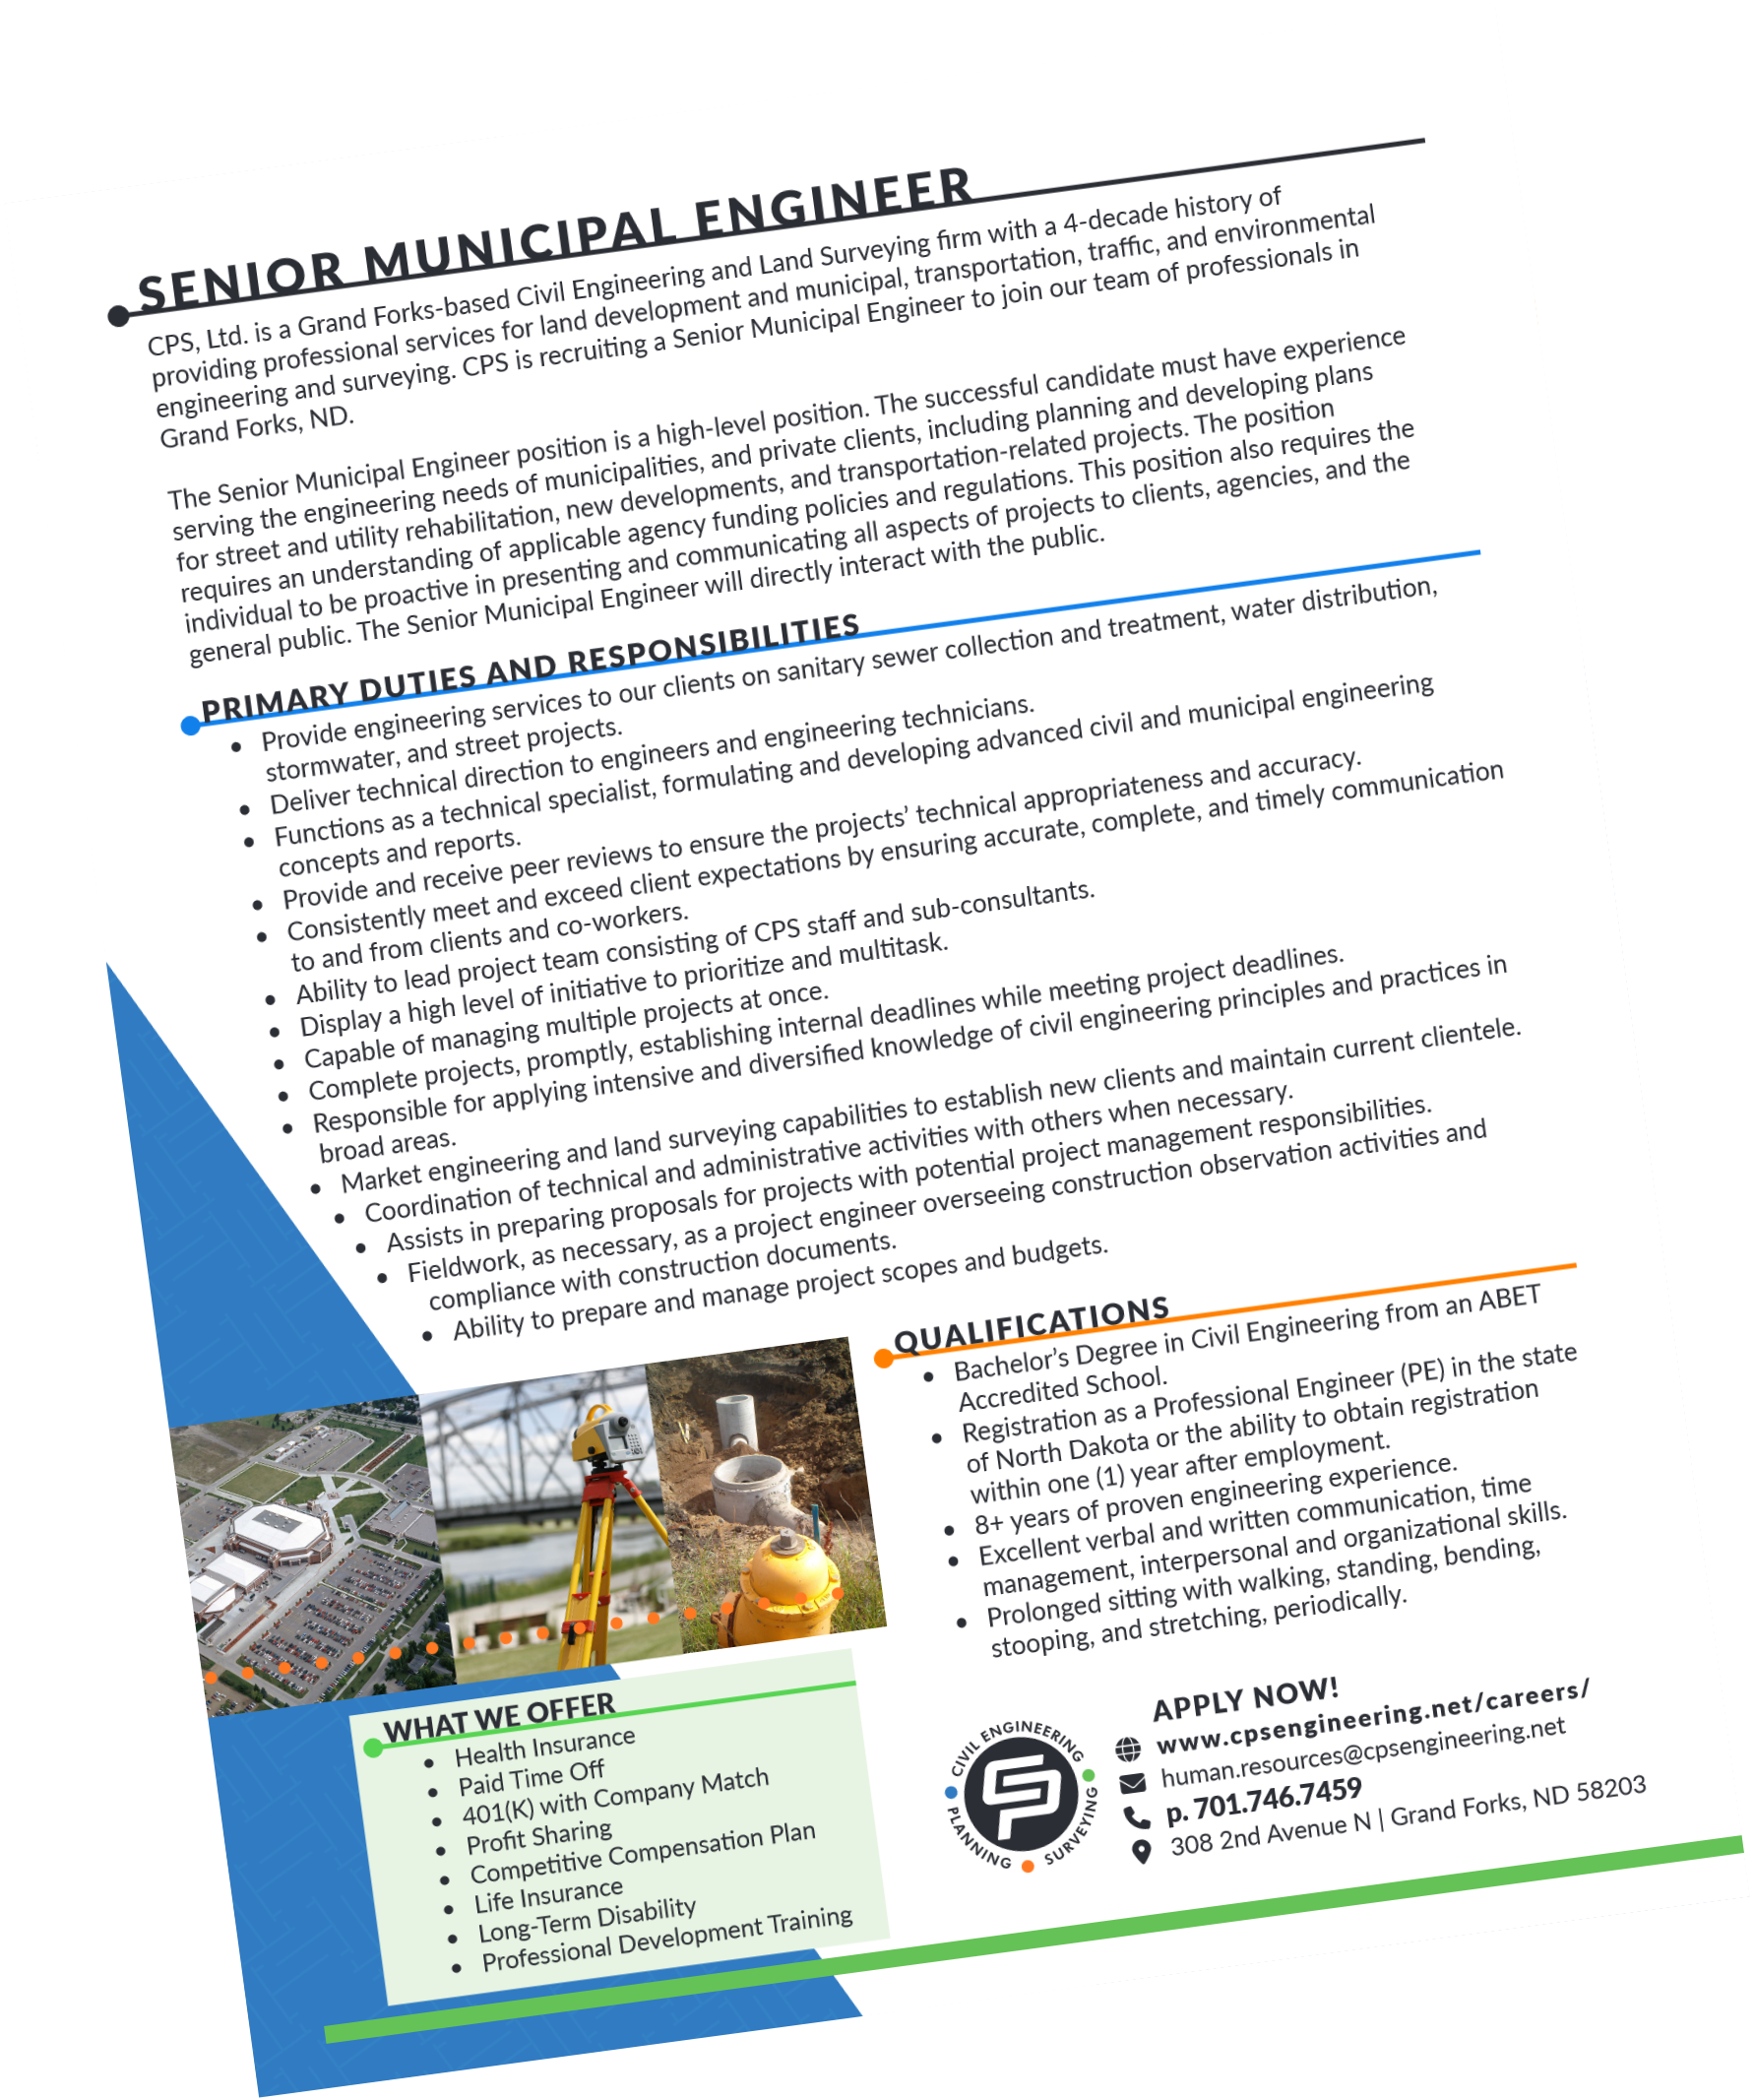 cps_senior_municipal_engineer_requirements_rotated